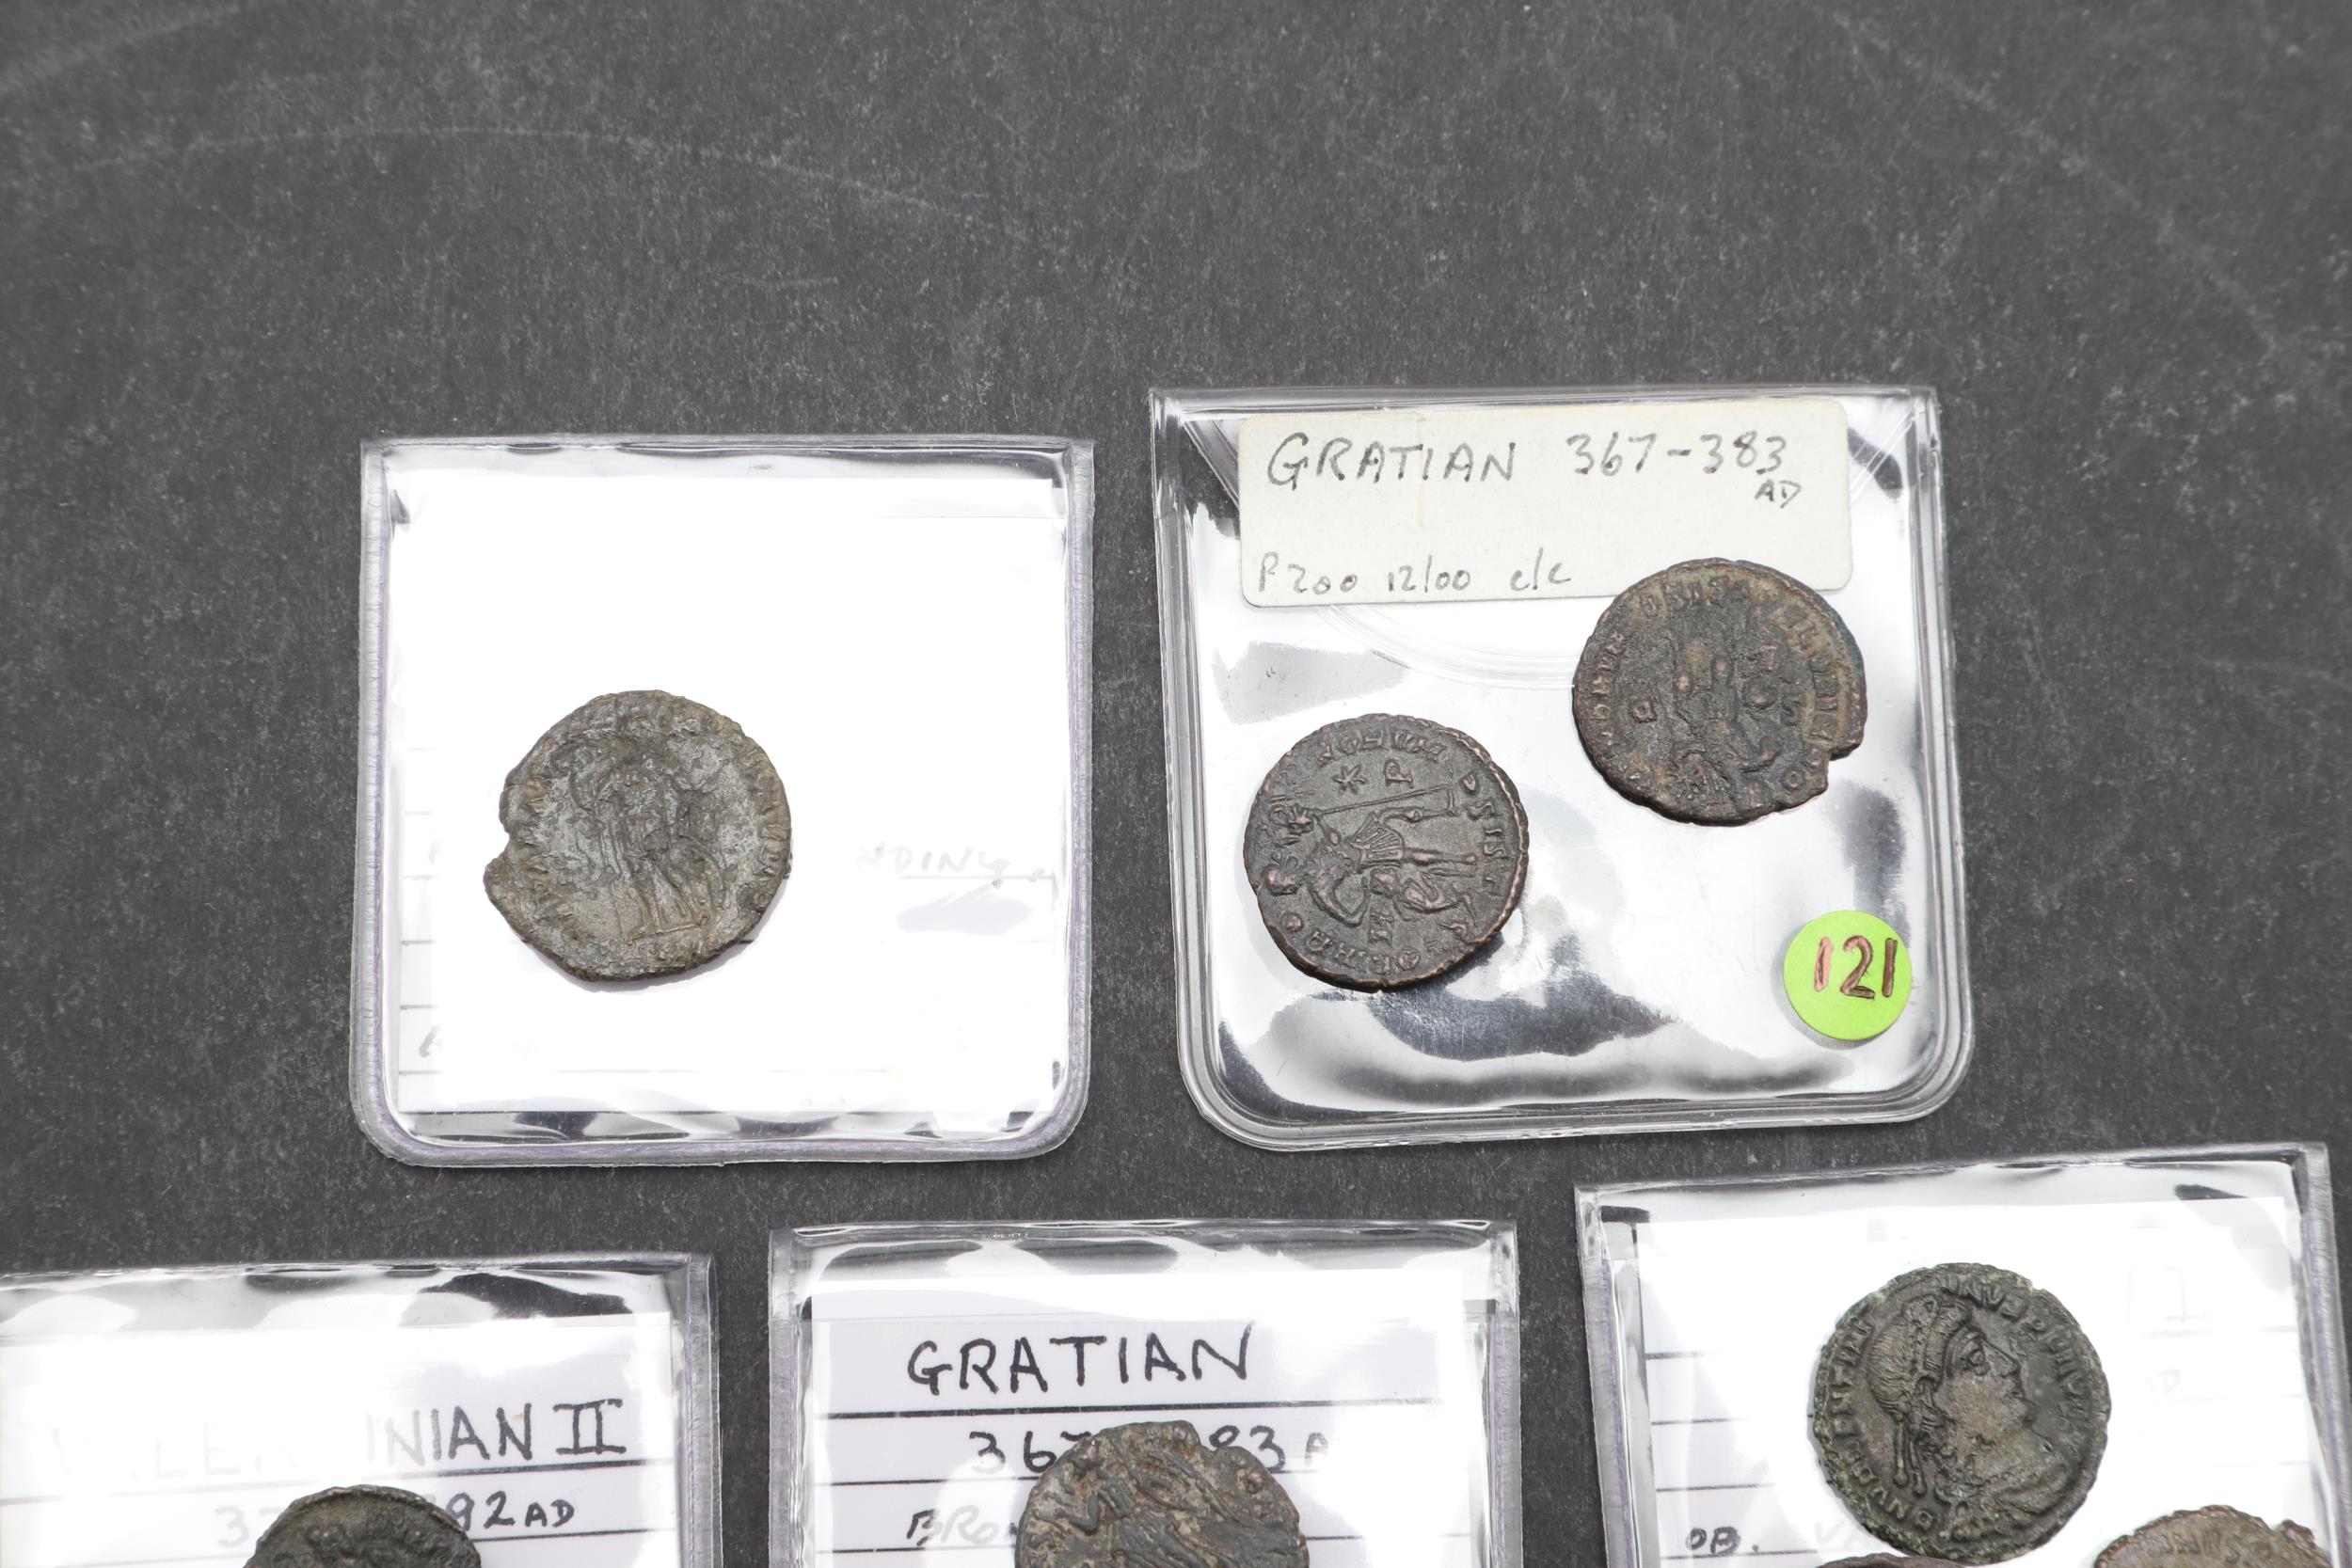 ROMAN IMPERIAL COINAGE: PROCOPIUS 365-366 A.D. AND LATER. - Image 3 of 5